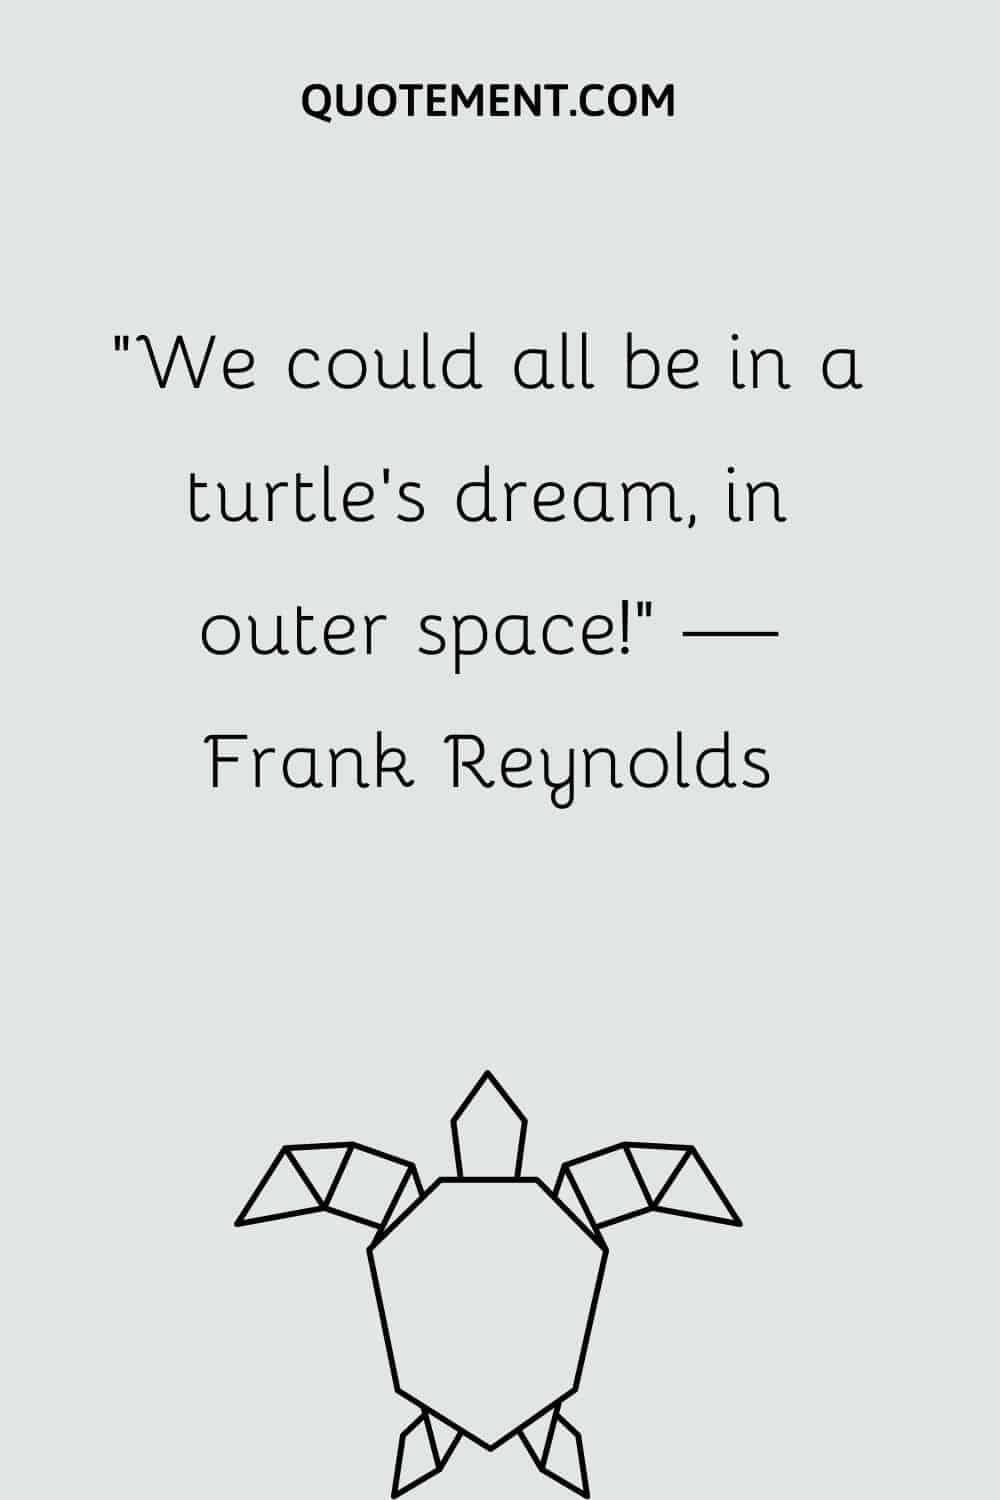 We could all be in a turtle’s dream, in outer space!